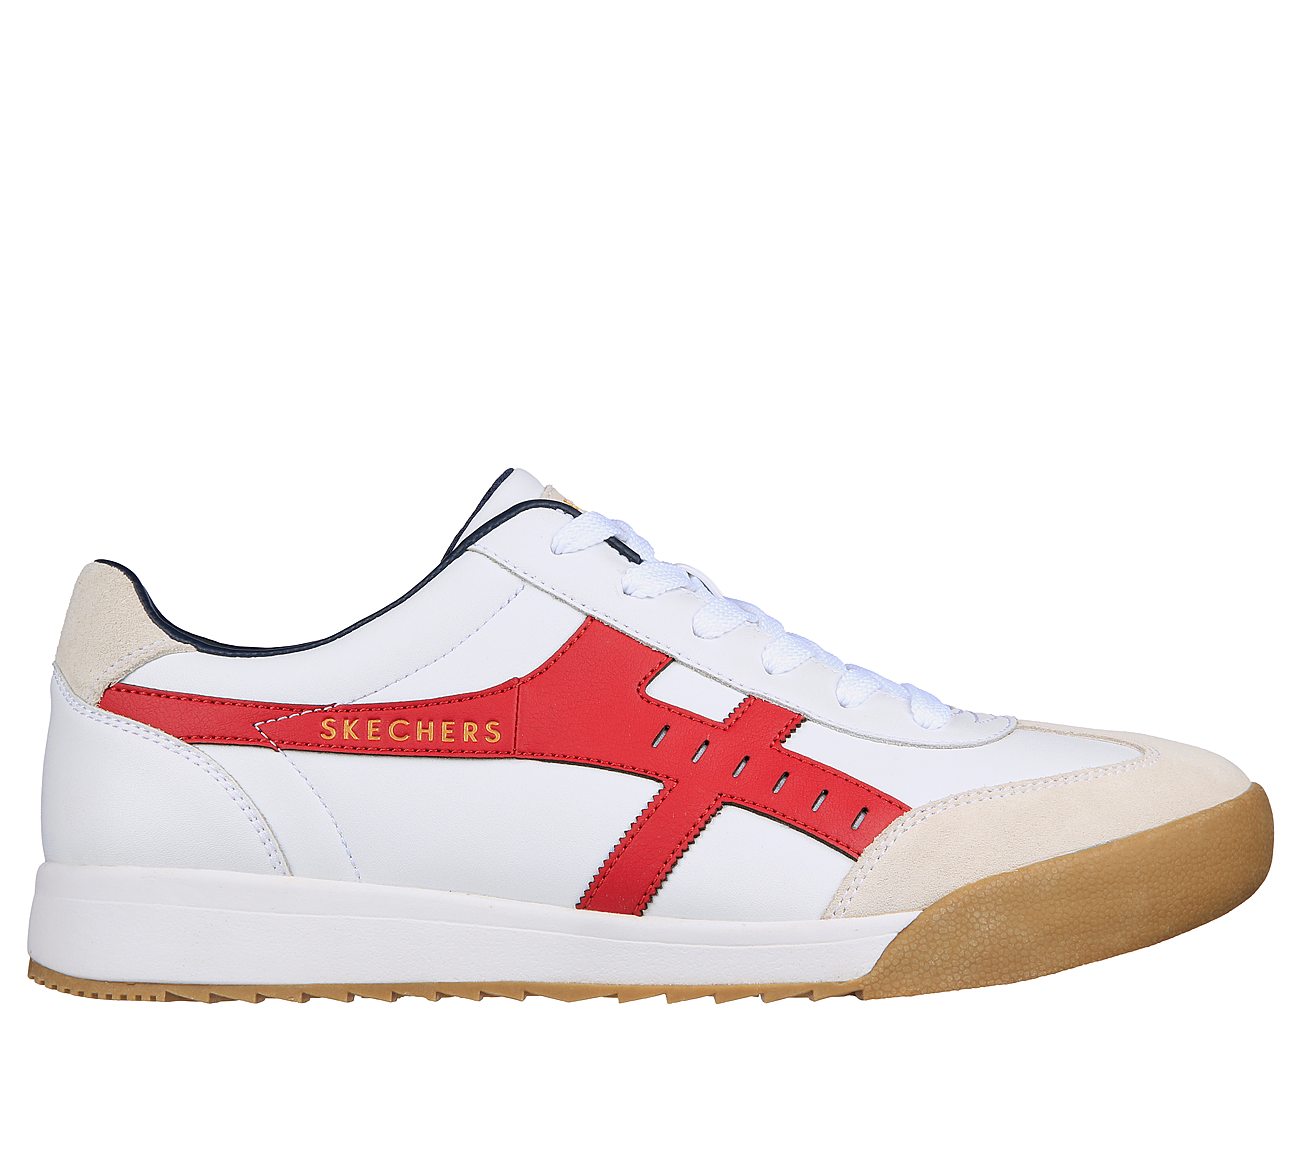 ZINGER - MANZANILLA, WHITE/RED/NAVY Footwear Lateral View